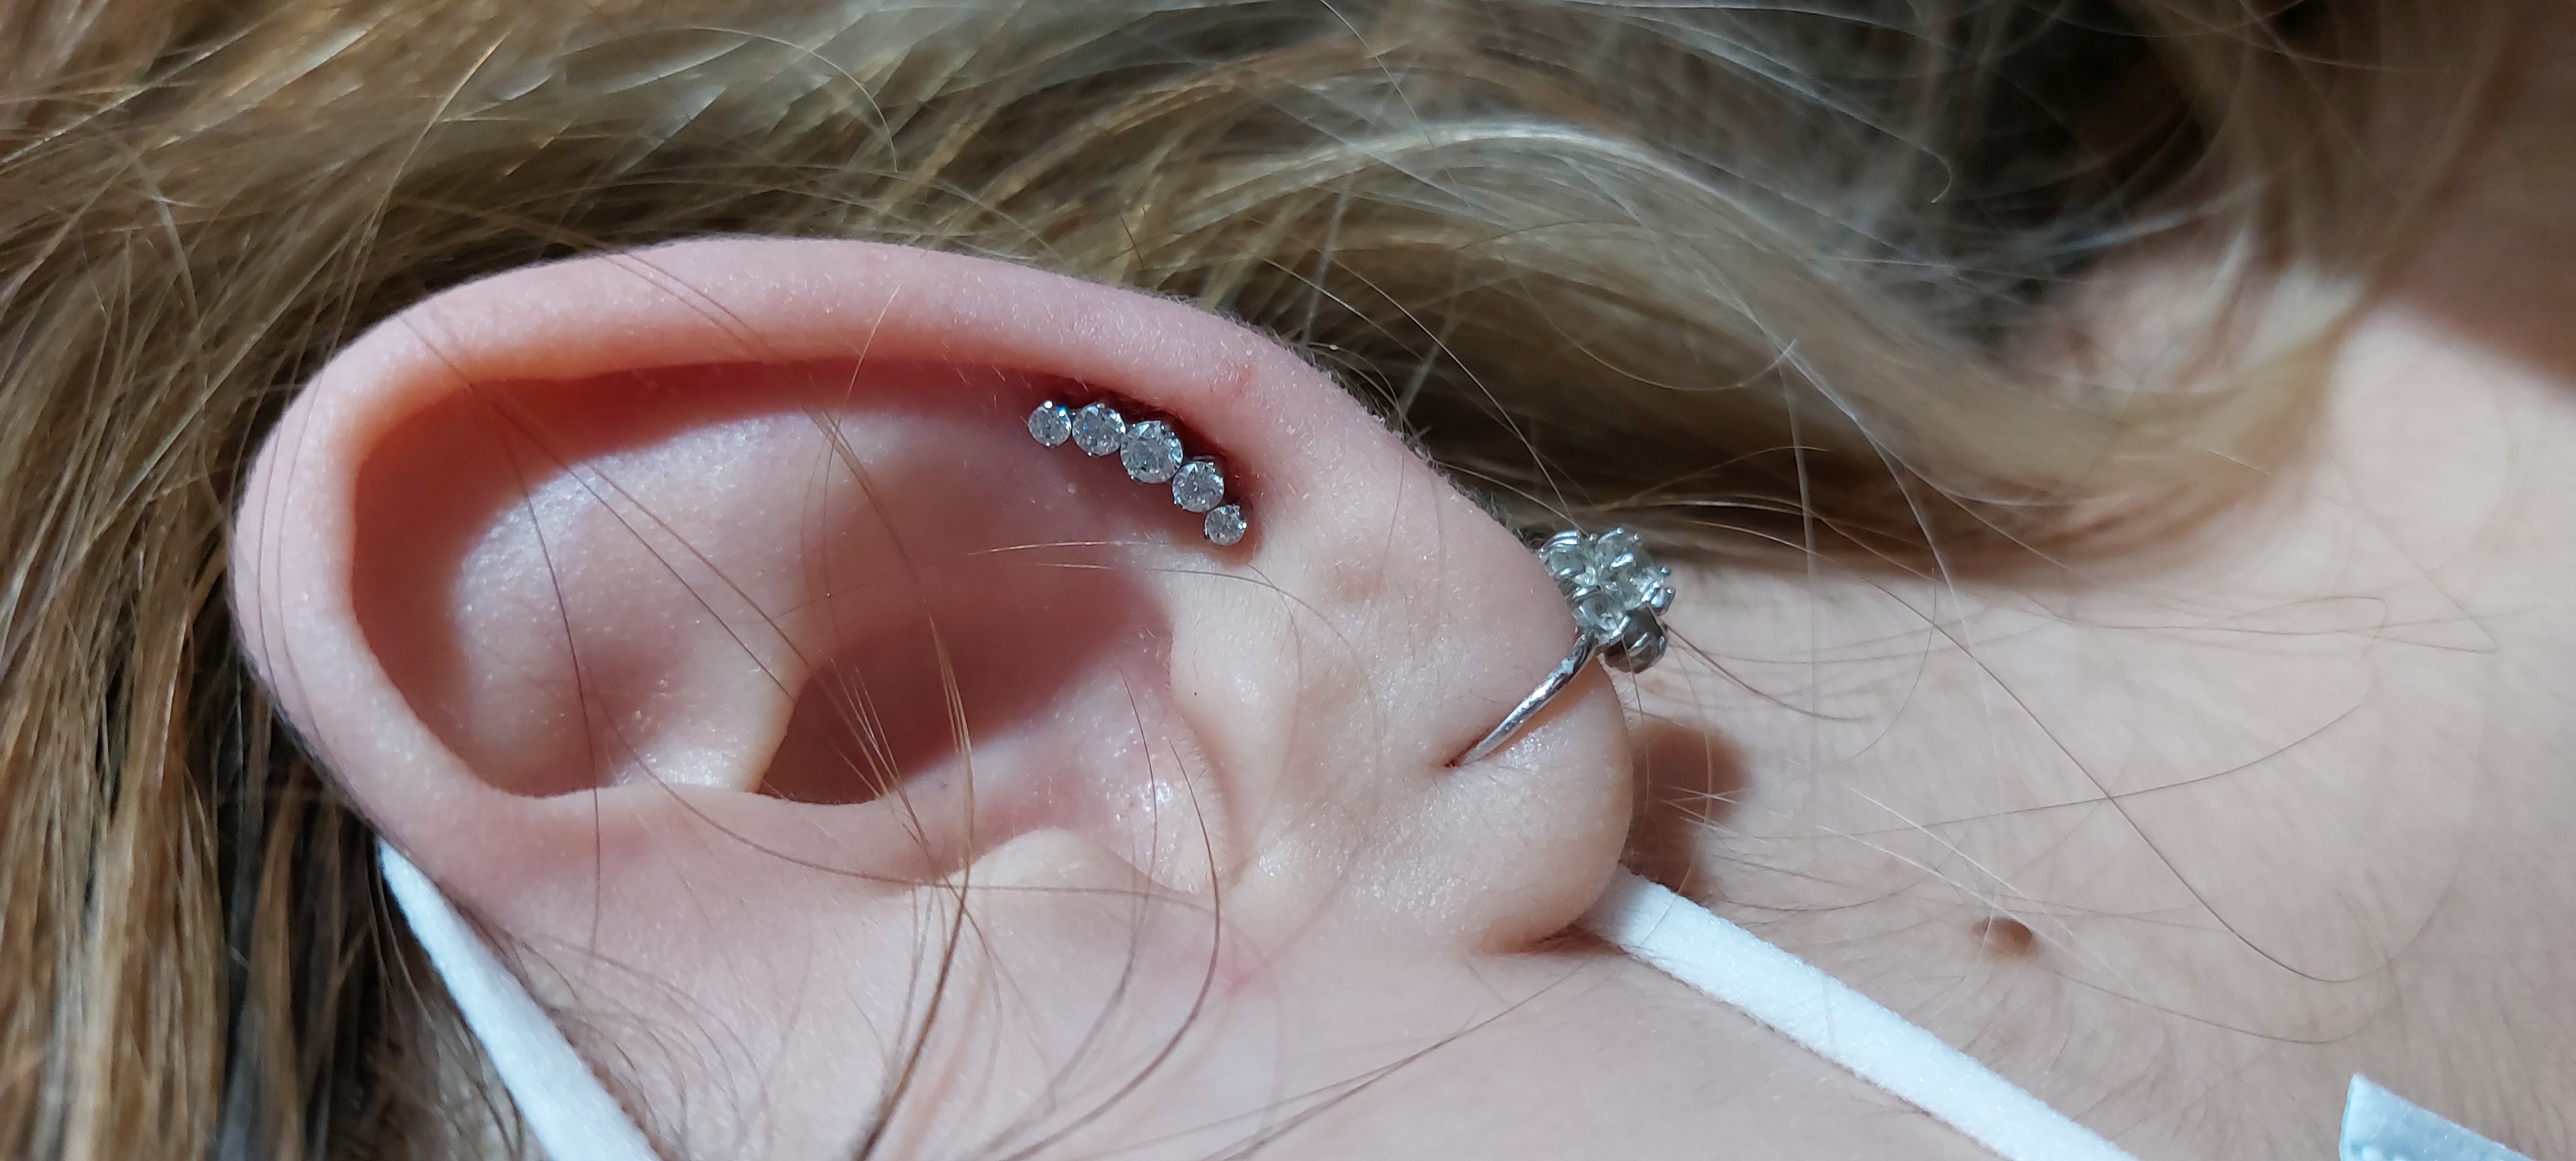 Middle helix